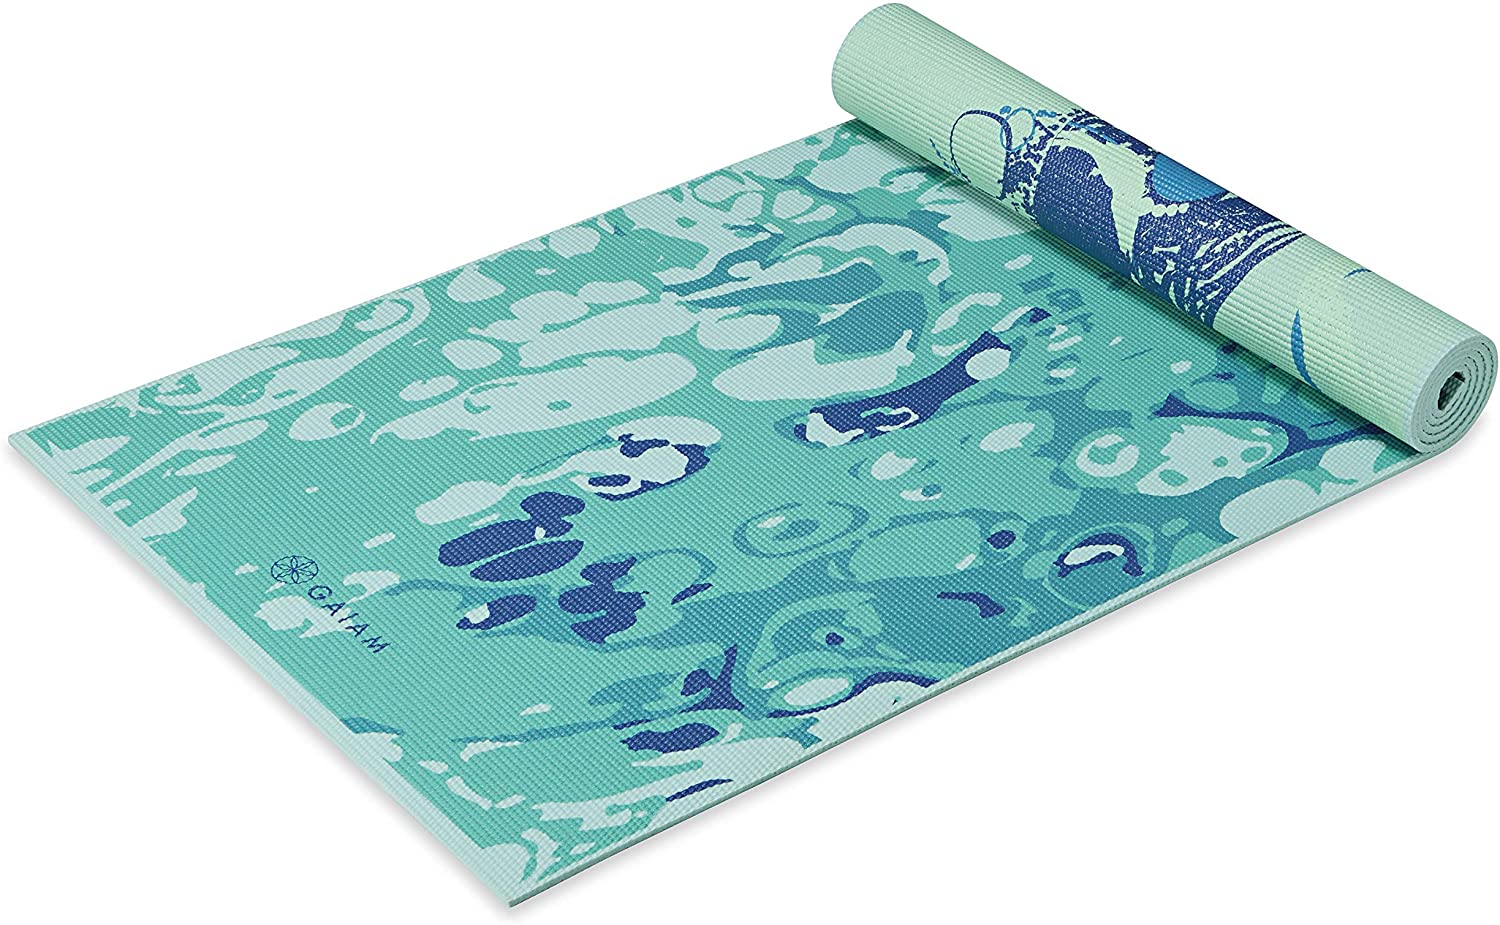  Gaiam Yoga Mat Premium Print Extra Thick Non Slip Exercise &  Fitness Mat For All Types Of Yoga